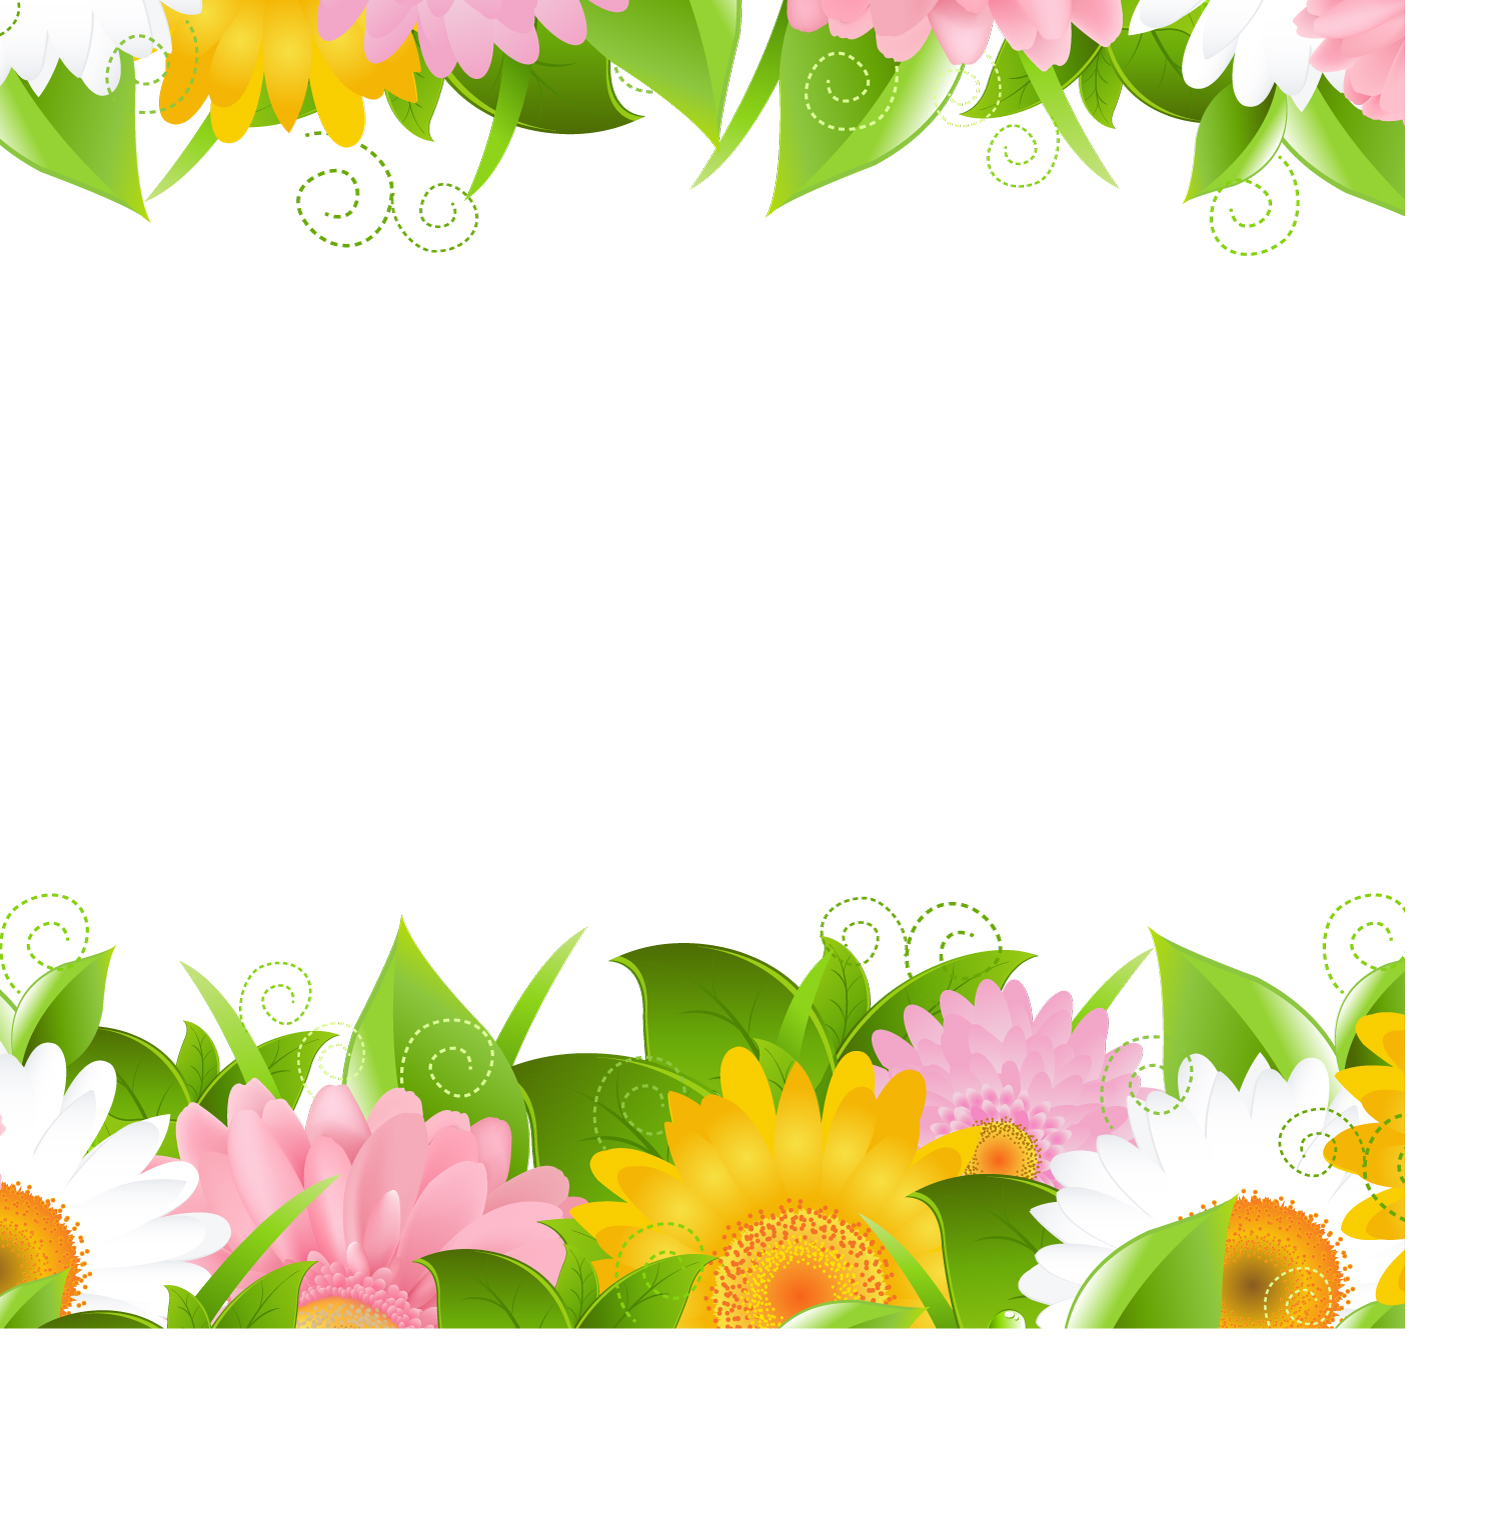 Flowers petals lace background 02 vector Free Vector